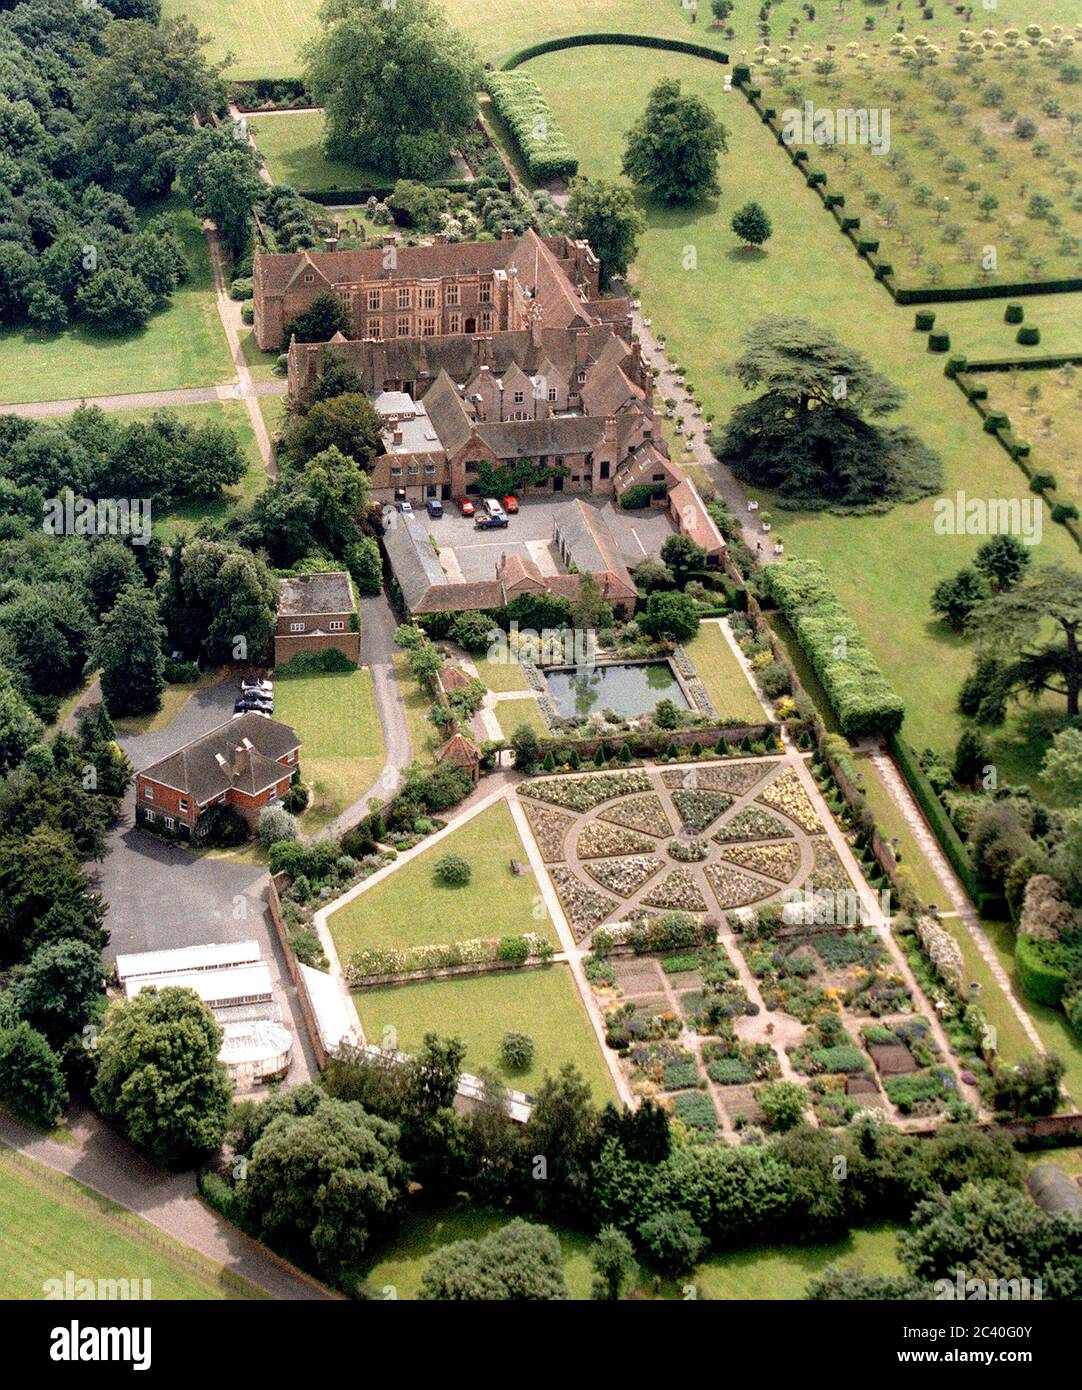 Sutton Place Near Guildford Surrey England Former Home Of Billionaire Jean Paul Getty And Now Owned By A Russian Billionaire Stock Photo Alamy